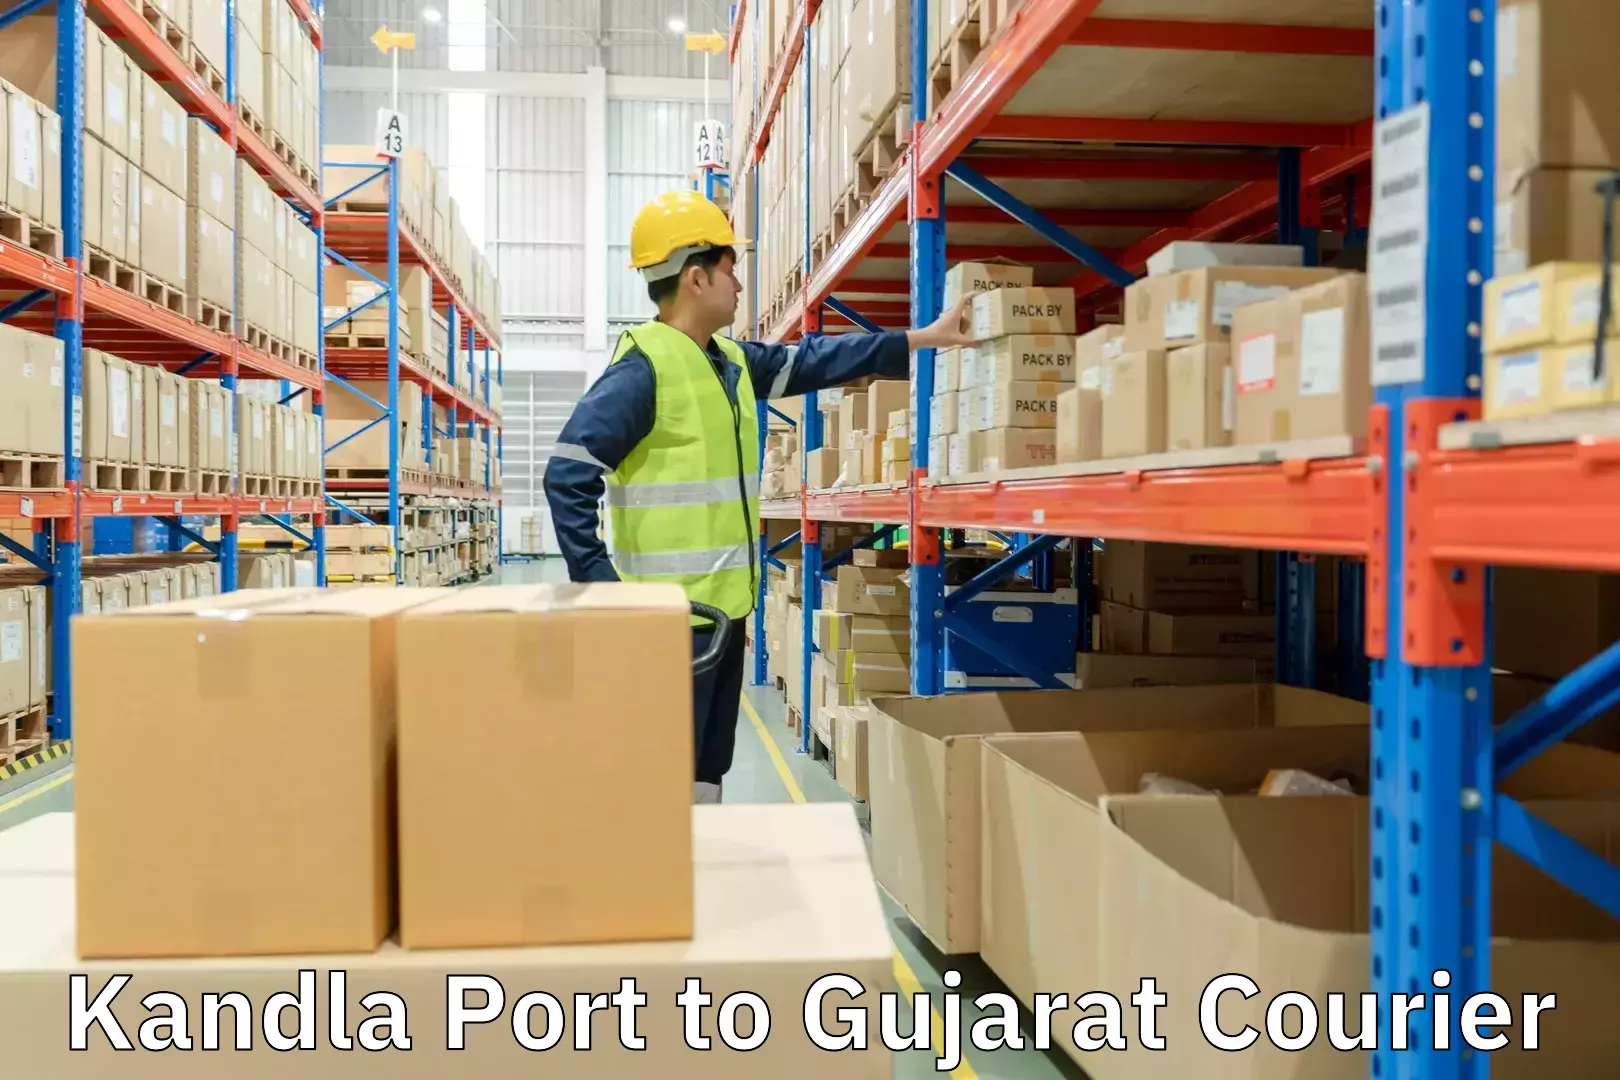 24-hour courier service in Kandla Port to Gujarat